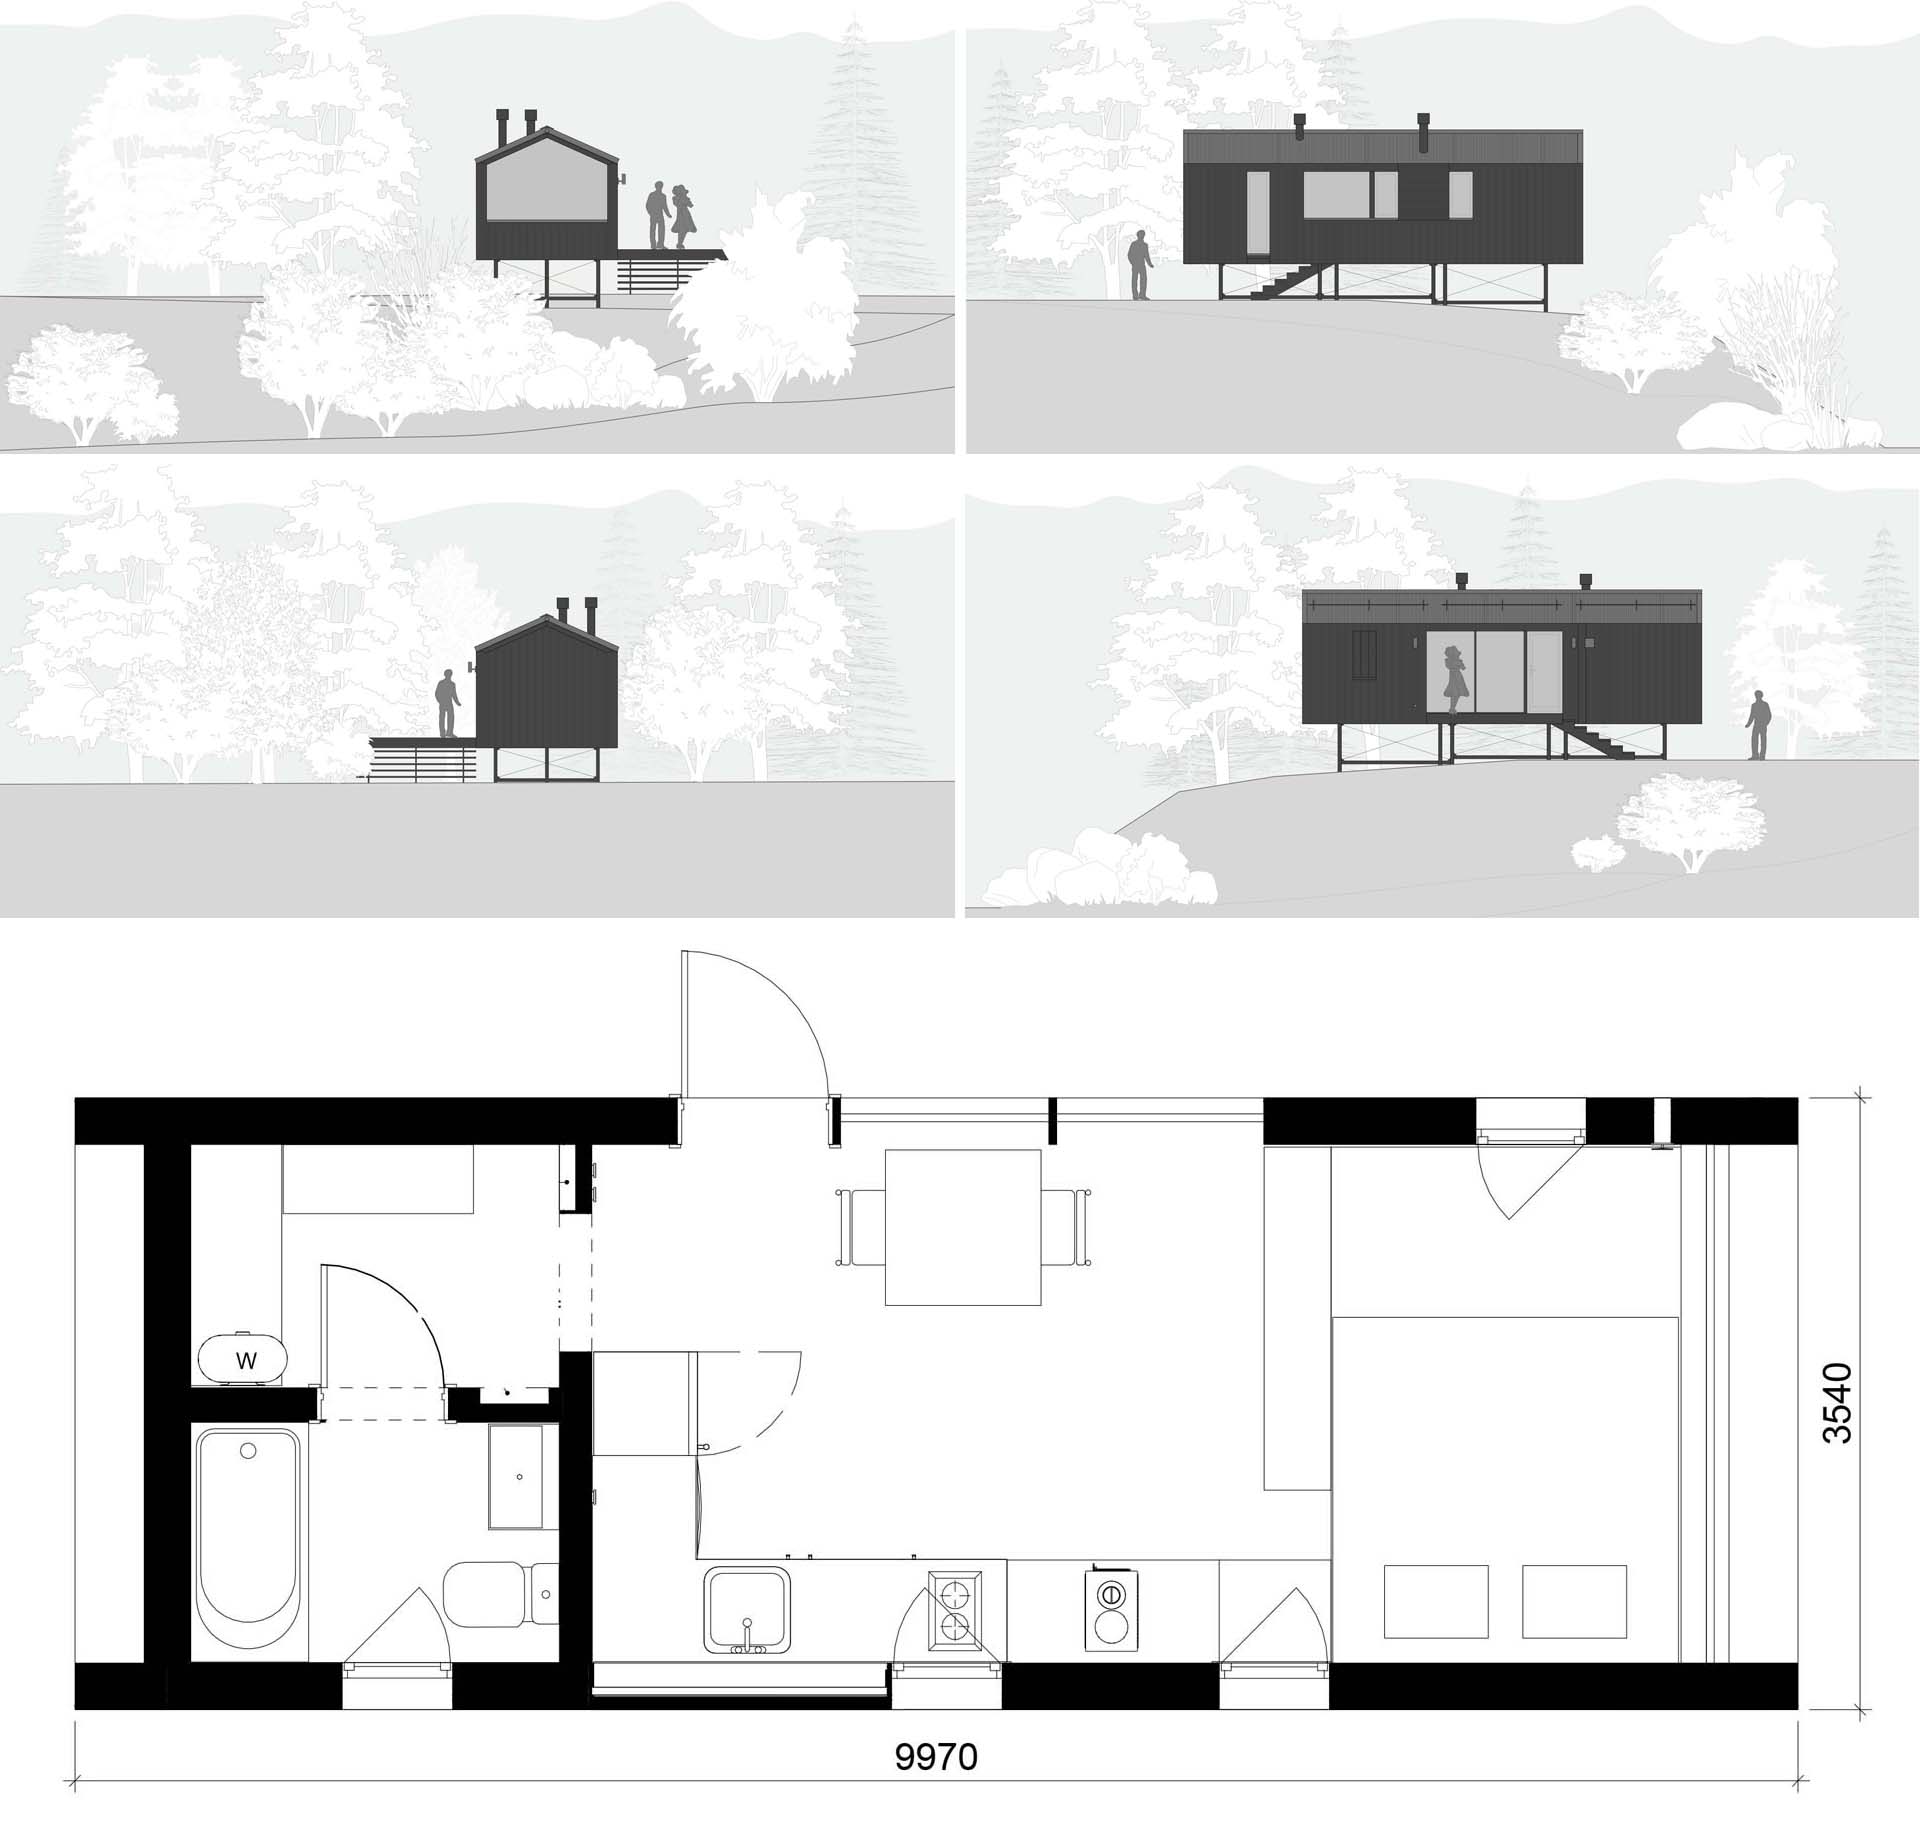 The sections and floor plan of a modern modular home.